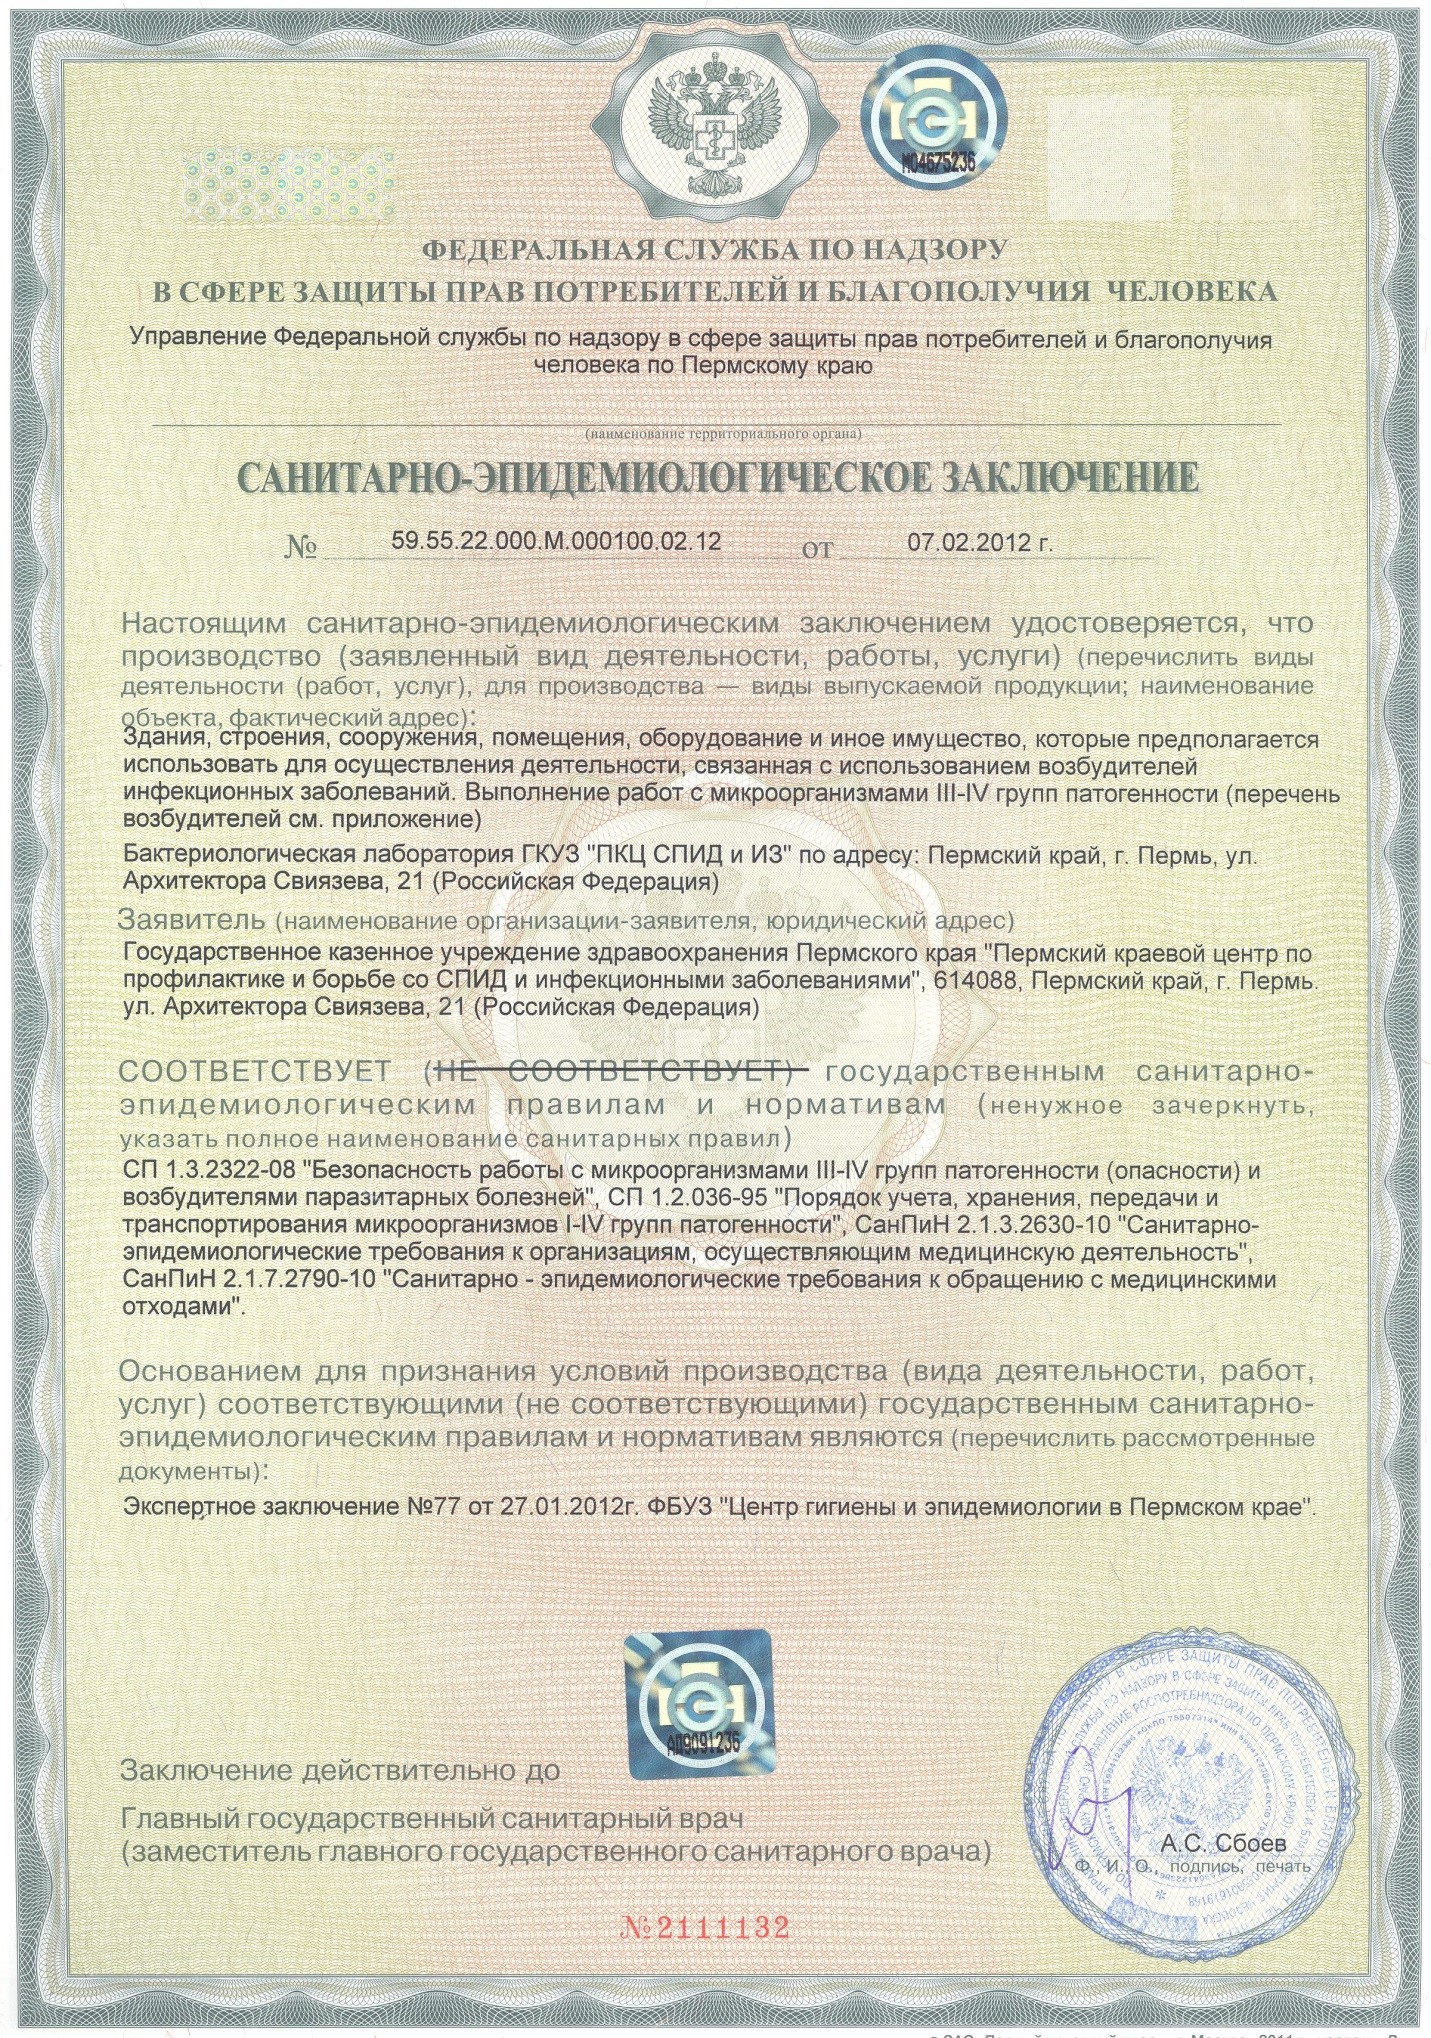 Sanitary-epidemiological certificate3